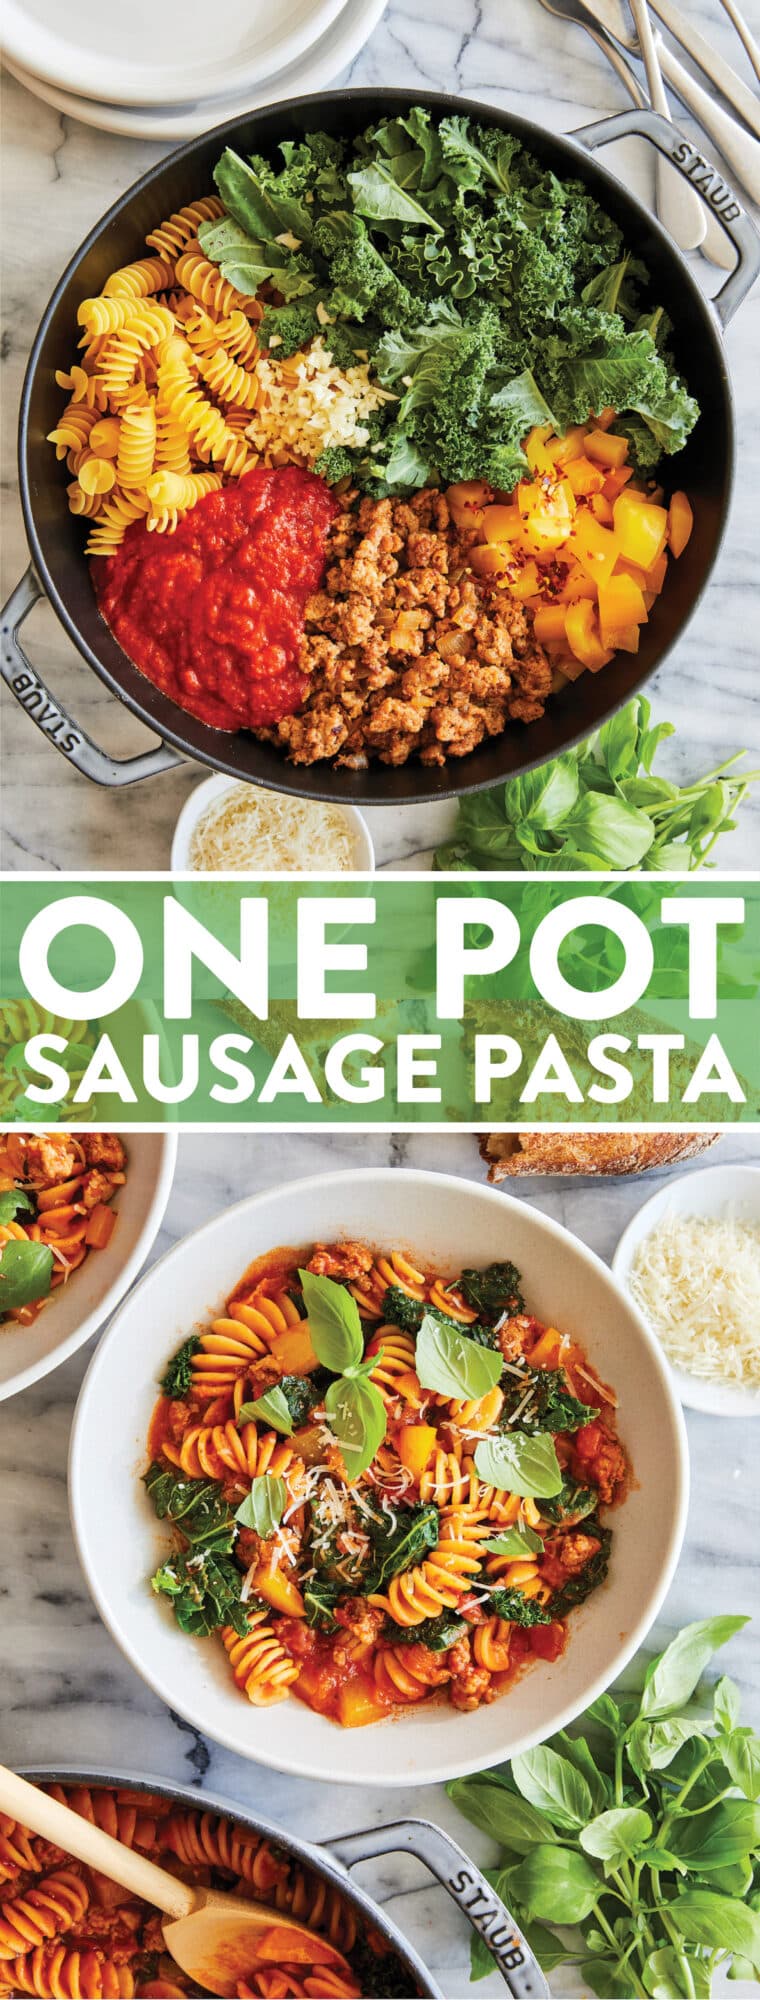 One Pot Sausage Pasta - With crumbled Italian sausage, sneaked in greens, marinara sauce and Parmesan. TRULY A ONE SKILLET DINNER! So so easy!